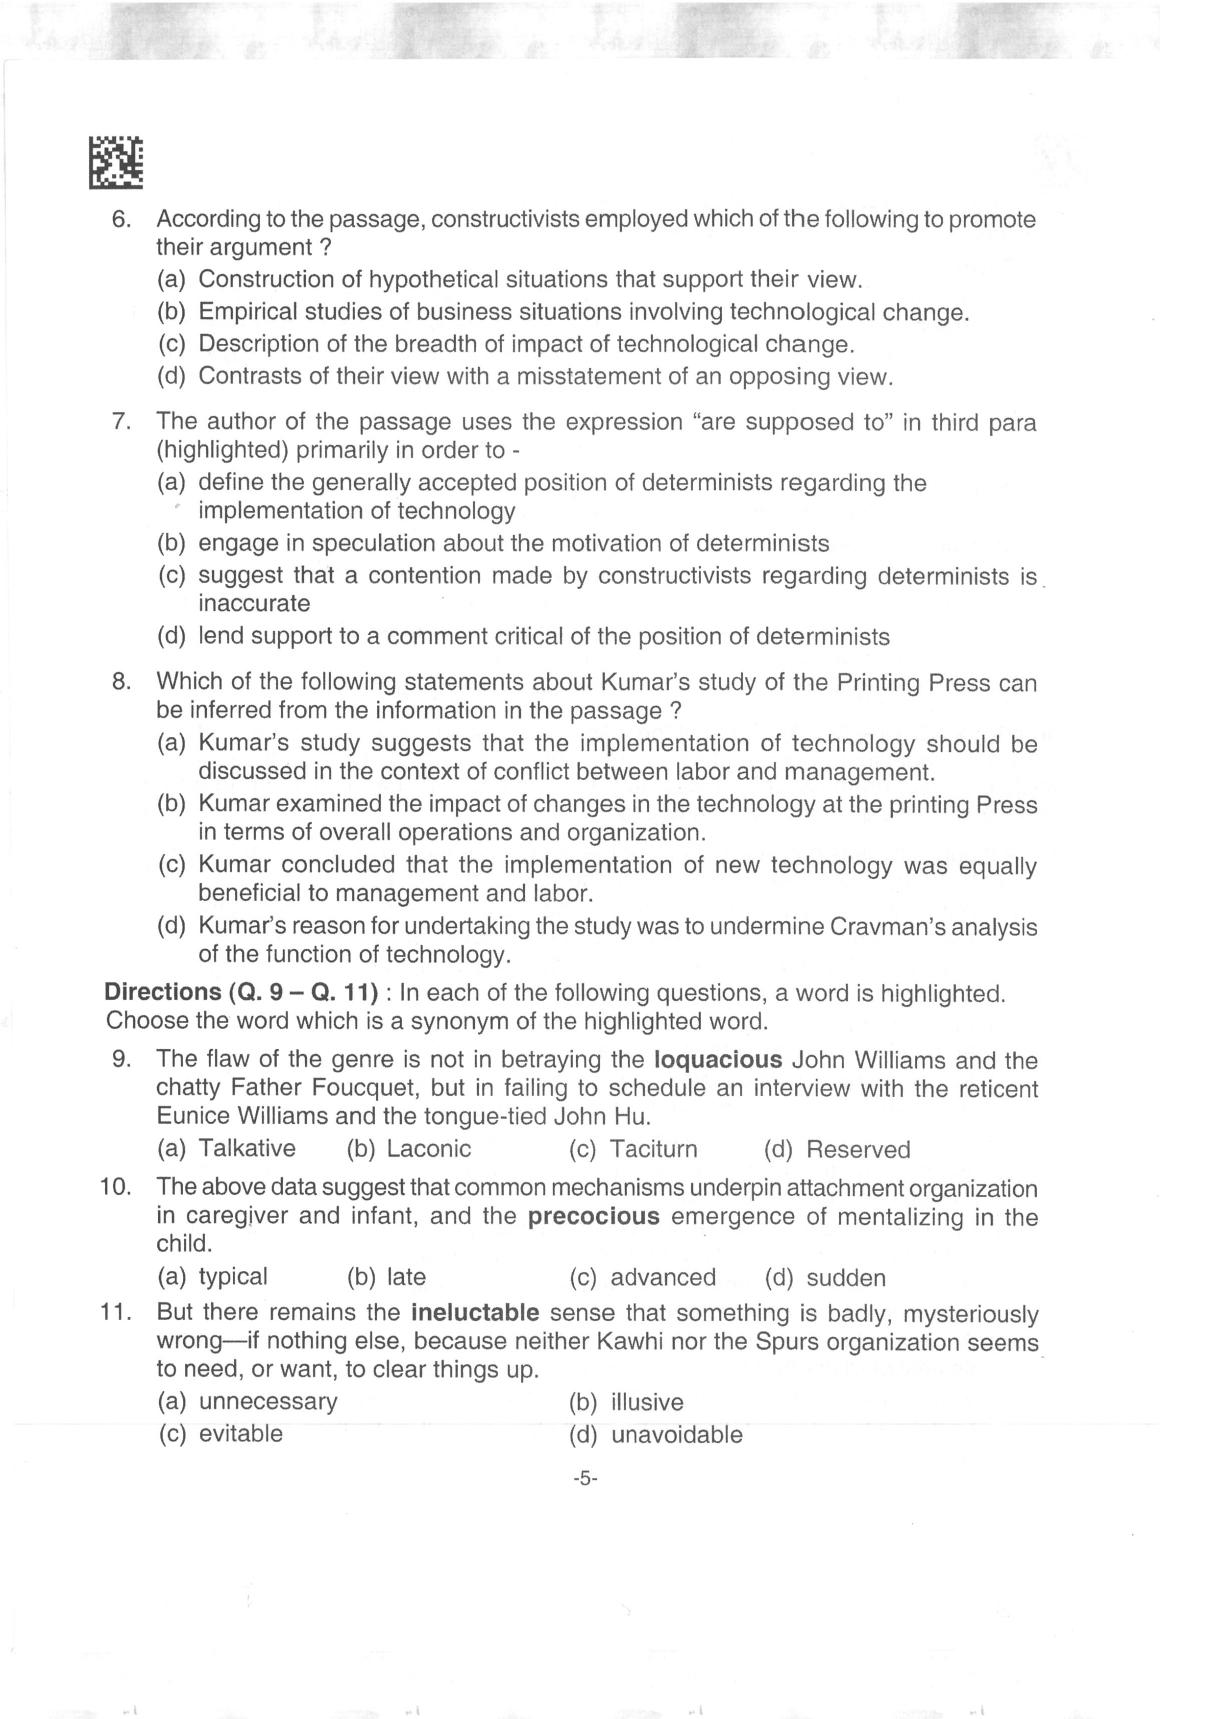 AILET 2019 Question Paper for BA LLB - Page 5